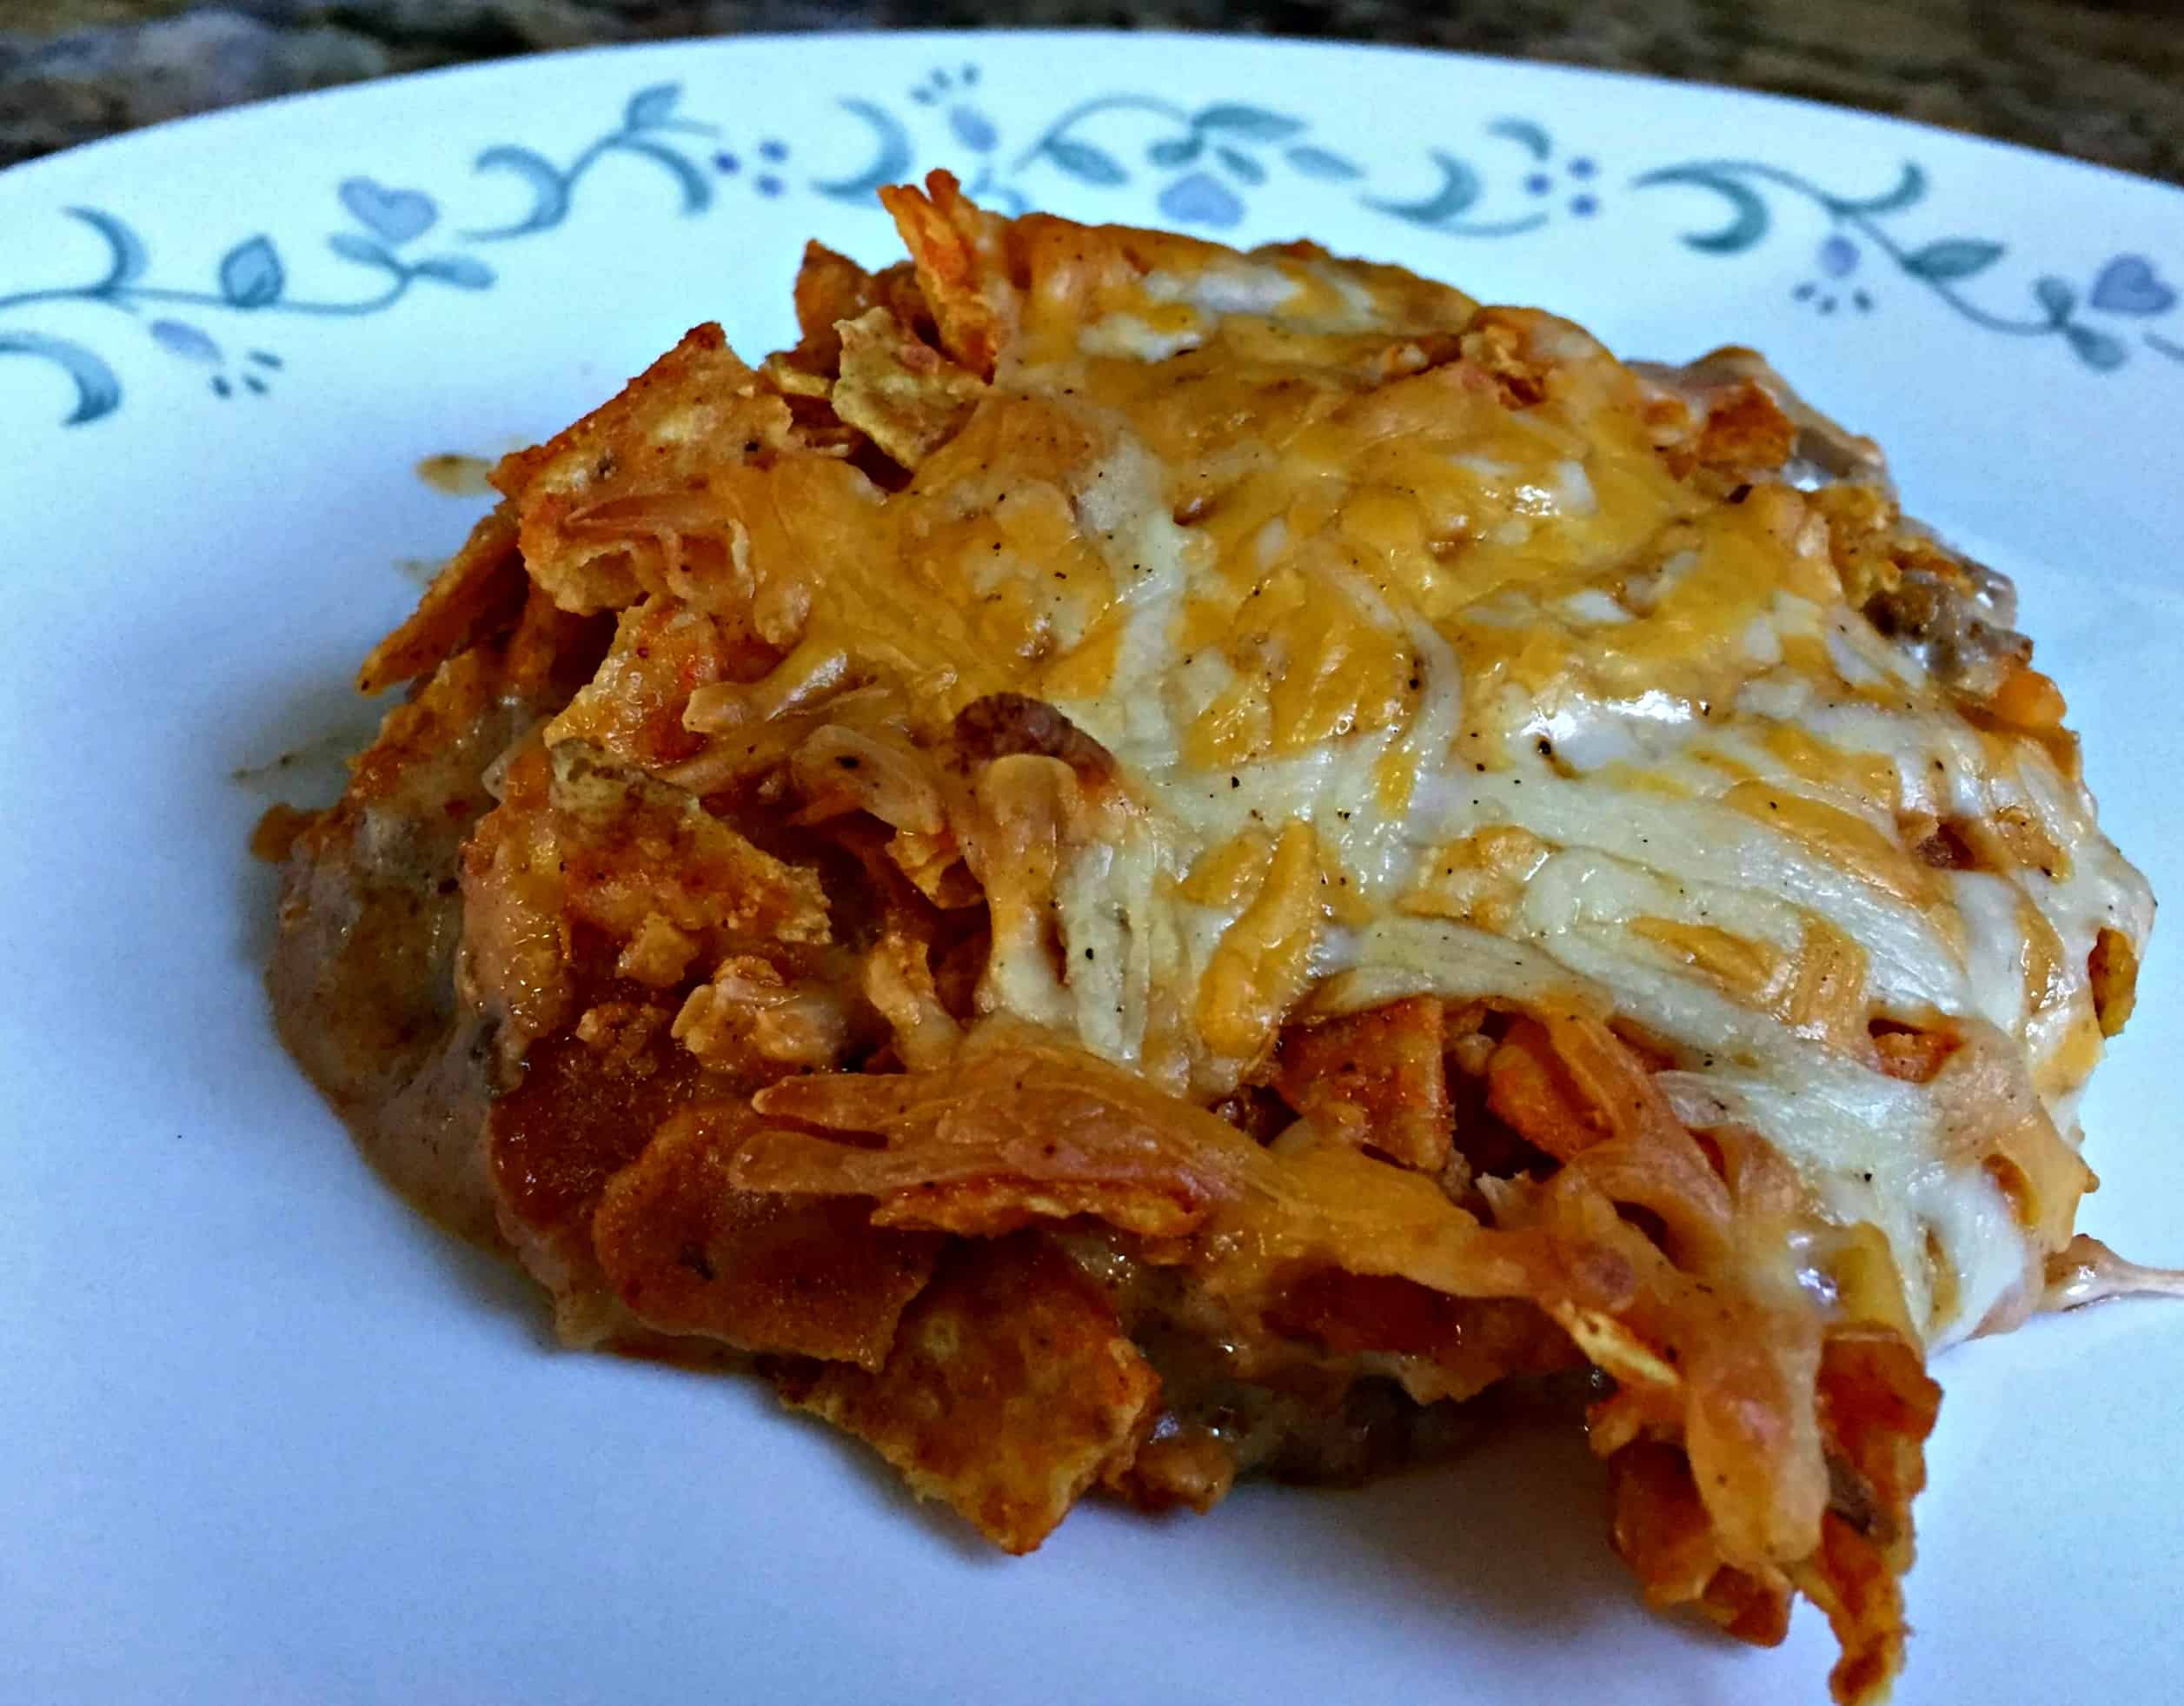 layered dorito casserole. easy weekday meals. quick meal. freezer meal. easy casserole idea. entertaining on a budget. frugal meals. cheap meals. how to feed a family on a budget.